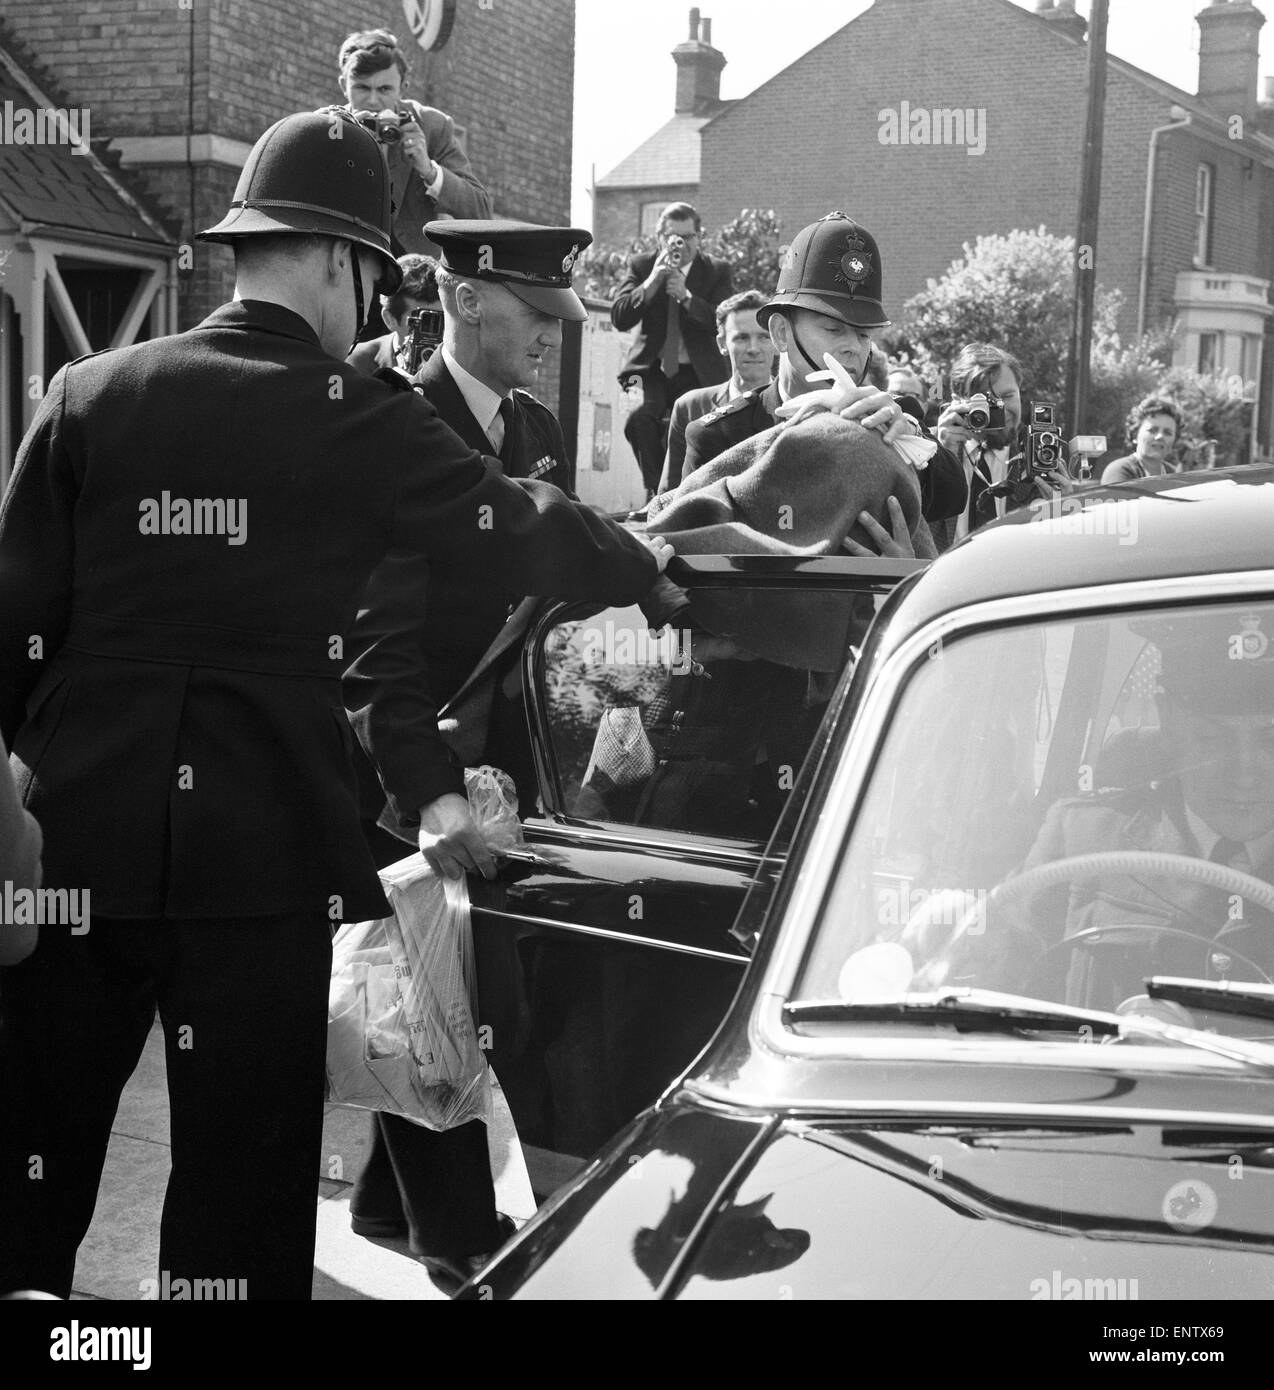 Thomas Wisbey, Great Train Robber, is escorted from Linslade Court by police officers, 12th September 1963. In 1965 Thomas Wisbey was jailed for 30 years for his part in the great £2,750,000 raid. Wisbey, who was paroled in 1976. Stock Photo